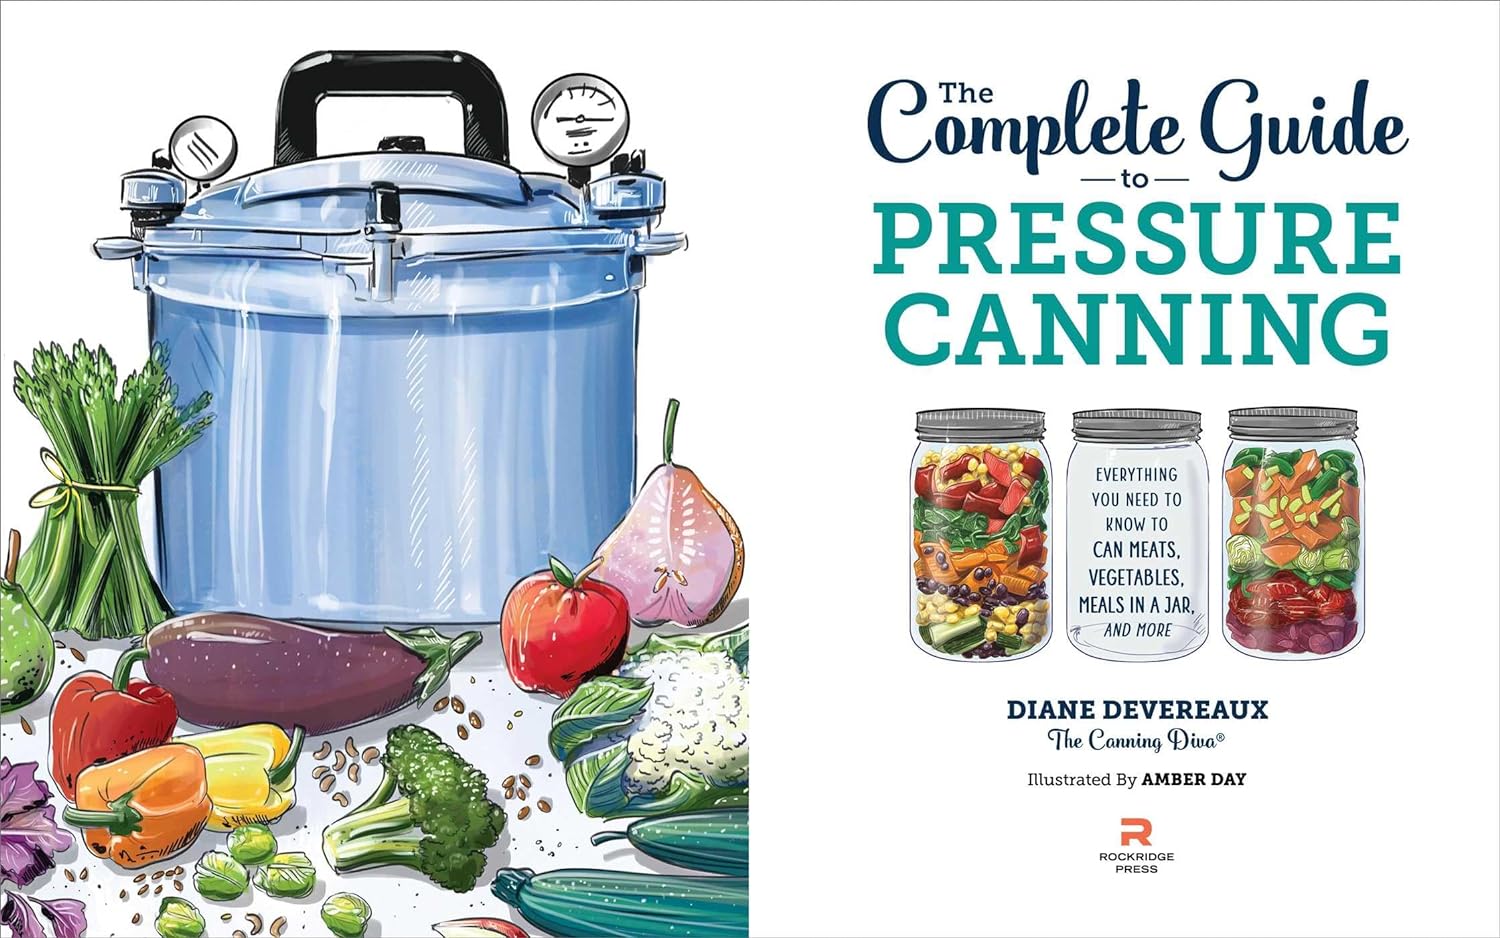 The Complete Guide to Pressure Canning: Everything You Need to Know to Can Meats, Vegetables, Meals in a Jar, and More     Paperback – July 24, 2018